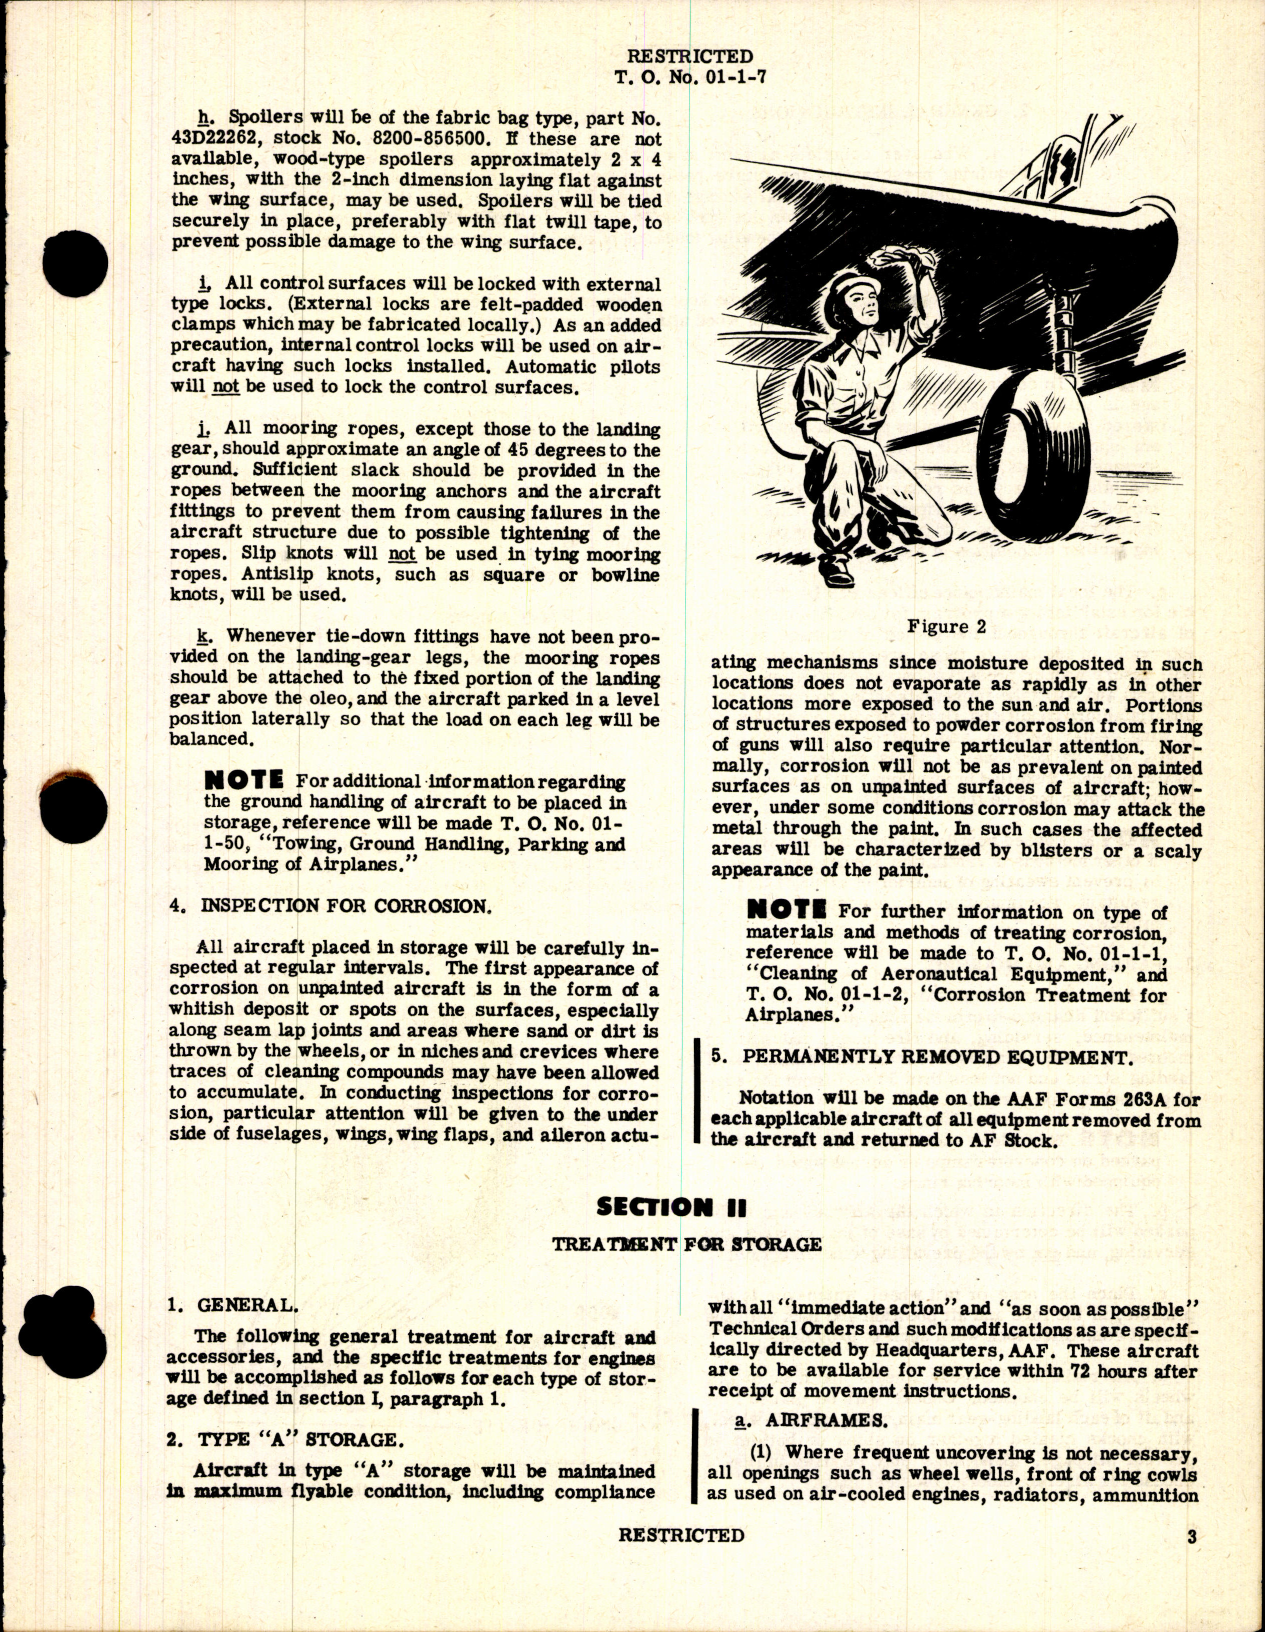 Sample page 3 from AirCorps Library document: Aircraft and Maintenance Parts for Storage of Aircraft